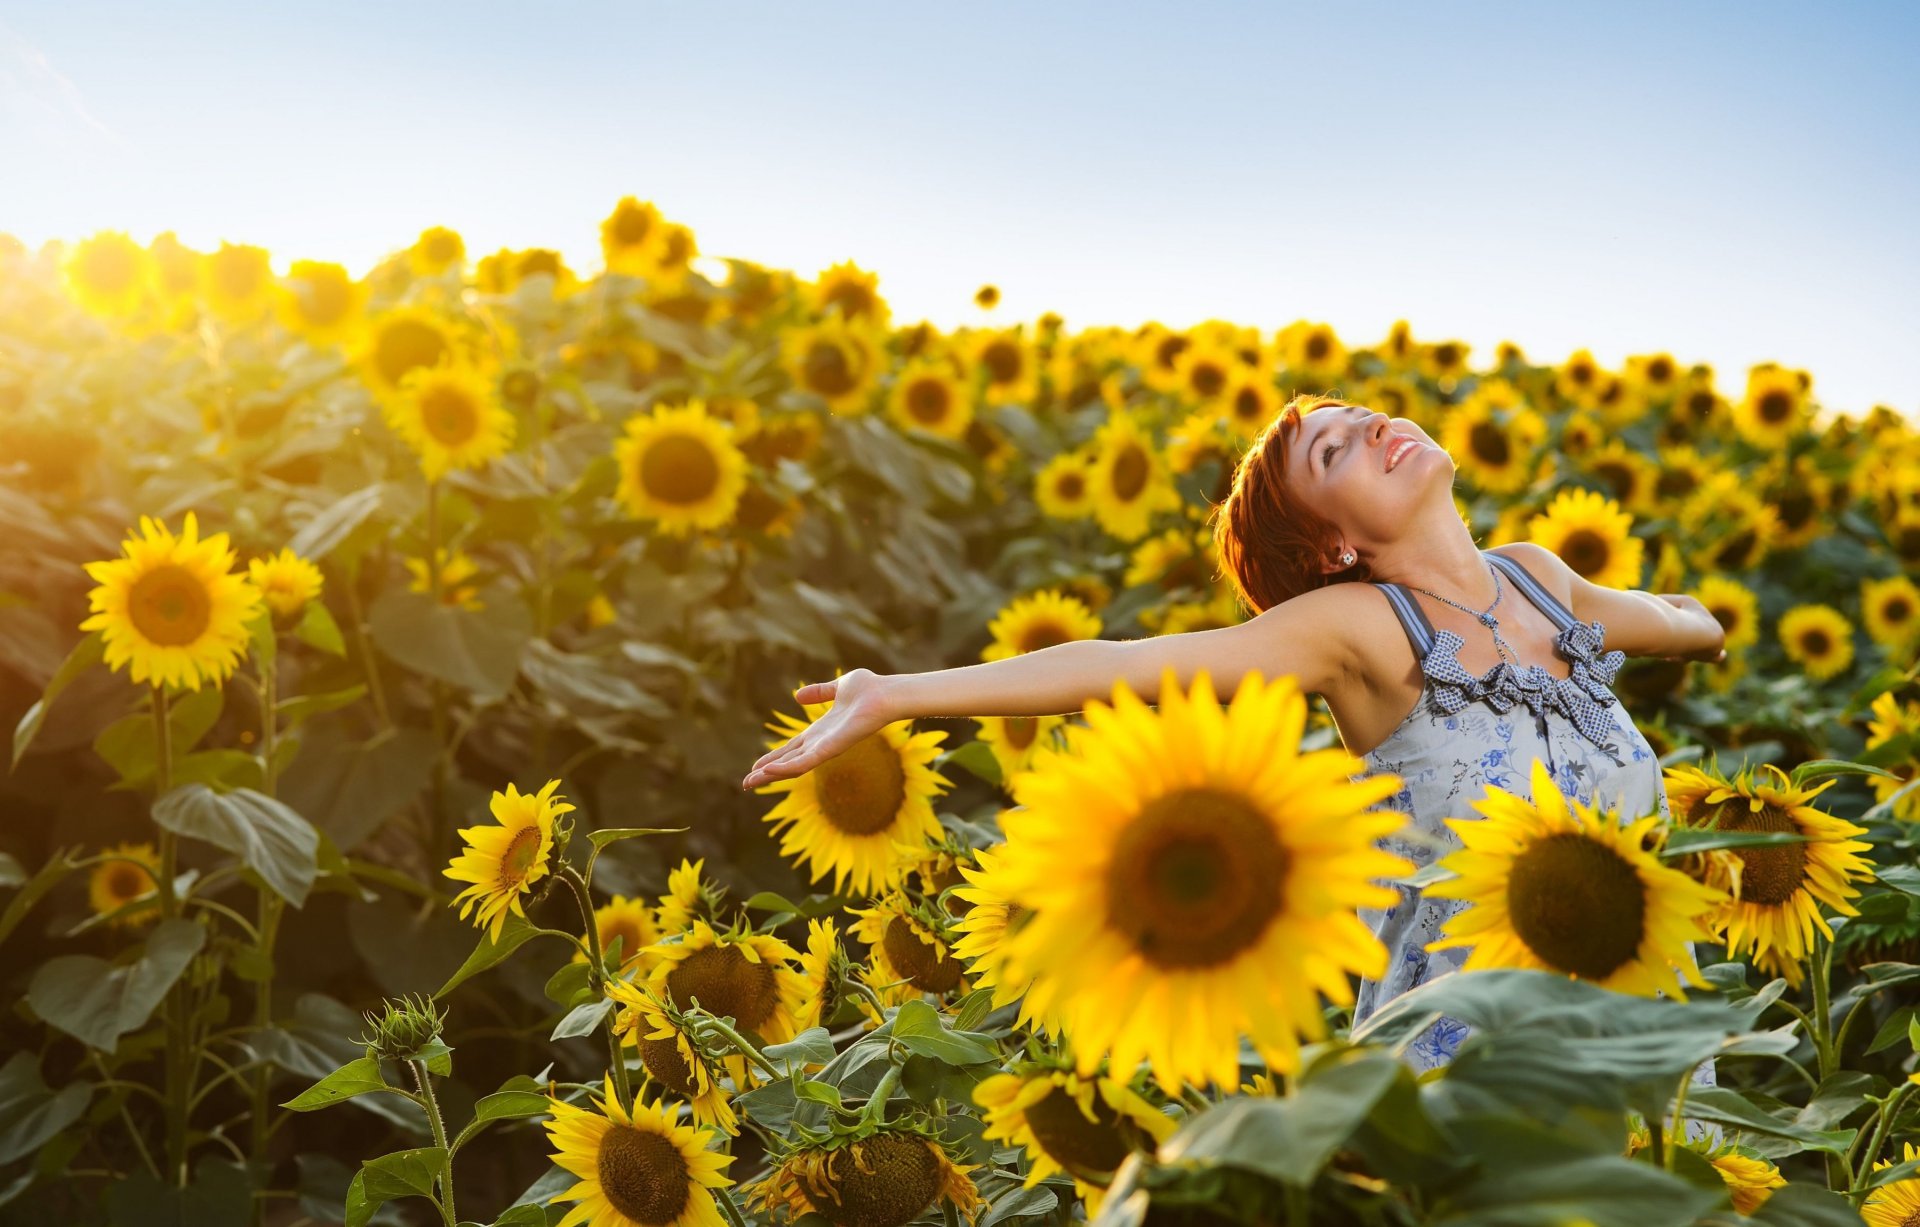 happy mood wallpapers hd,sunflower,people in nature,flower,yellow,sunflower